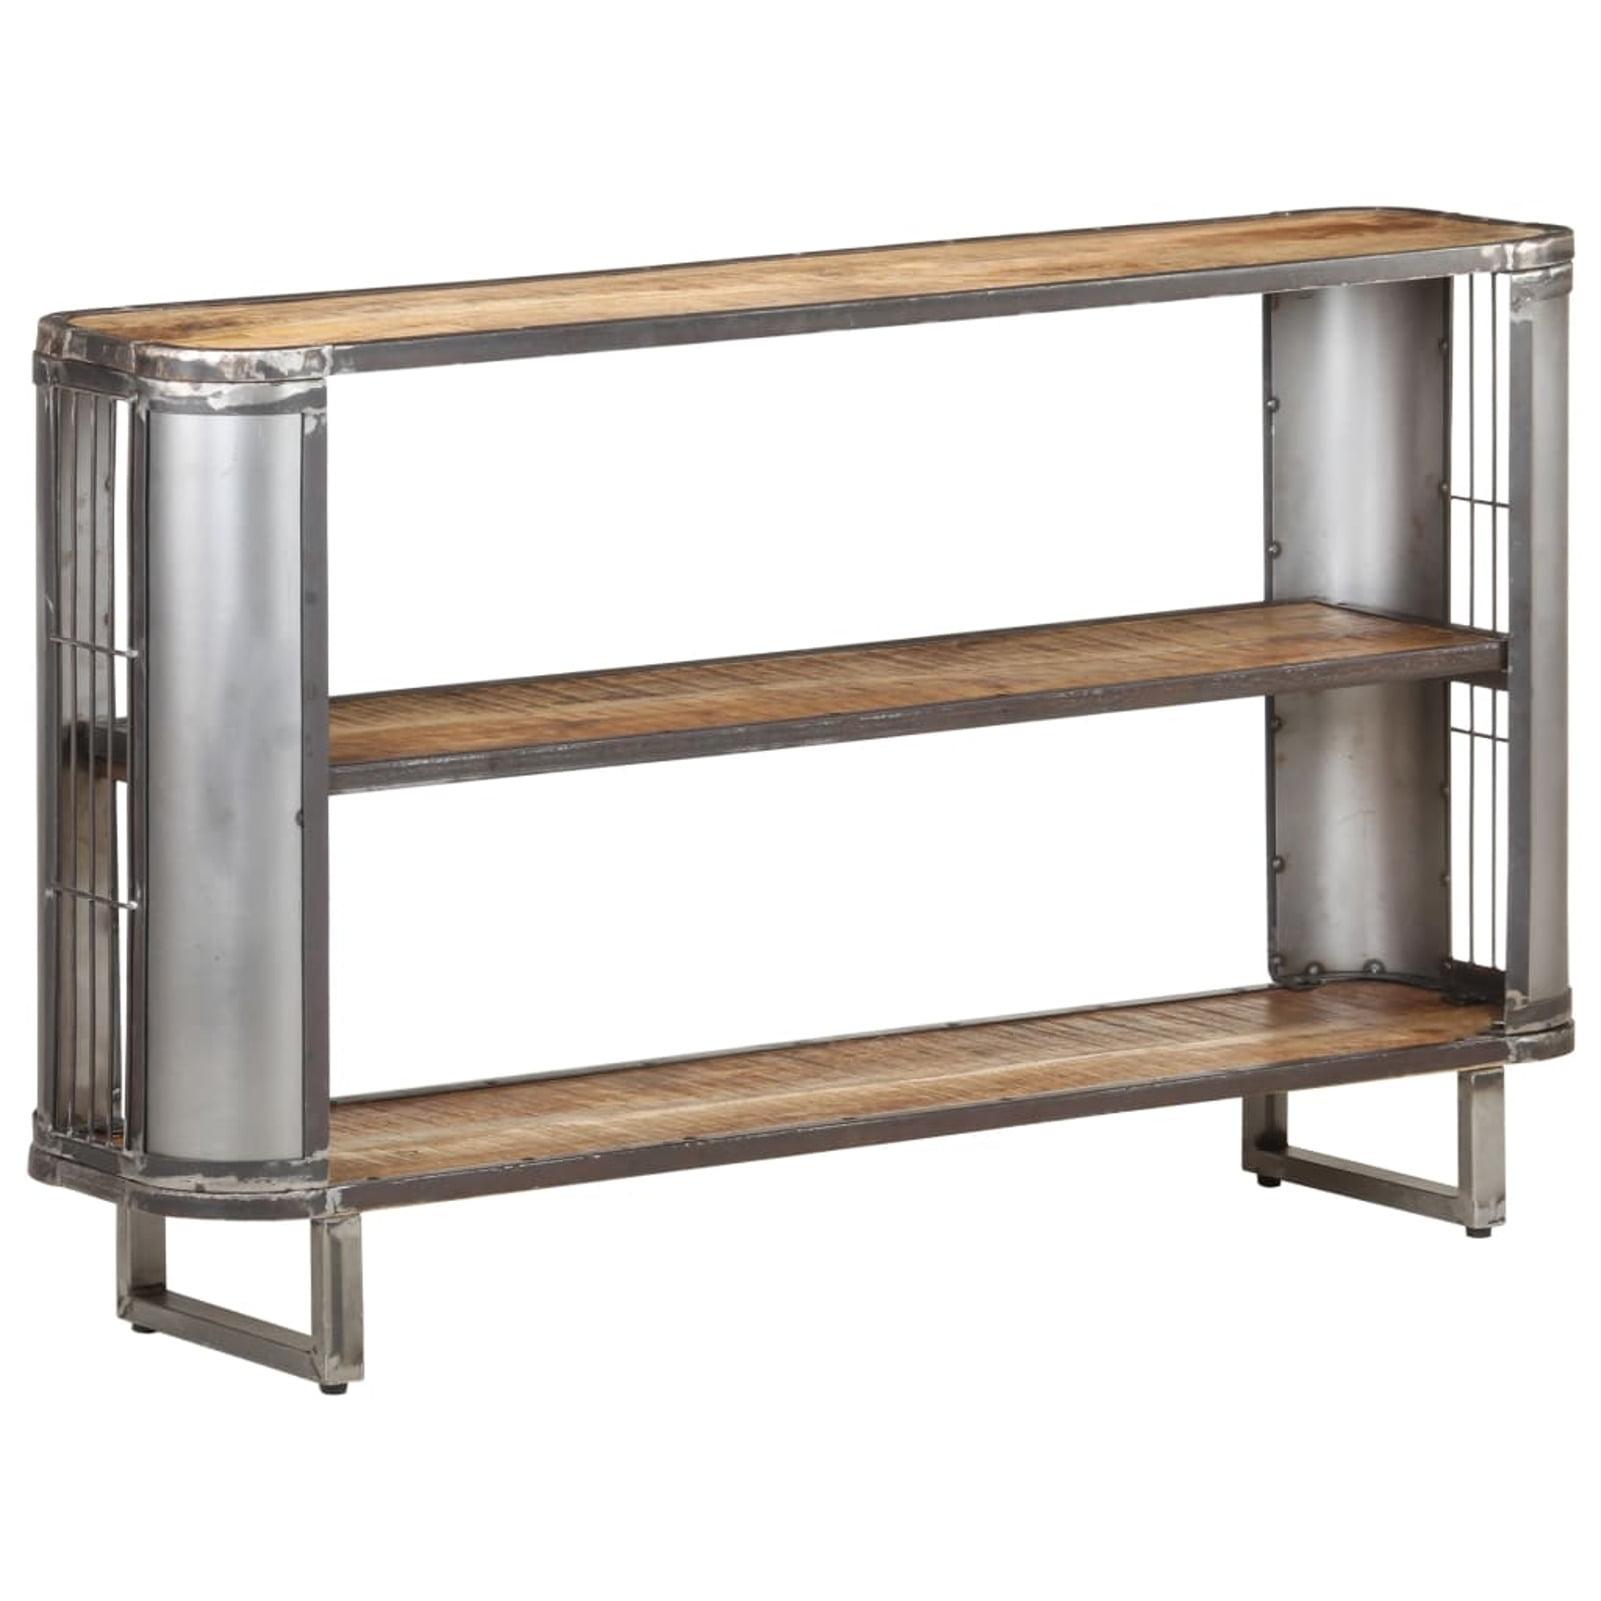 Timeless Industrial Solid Mango Wood Sideboard with Steel Accents